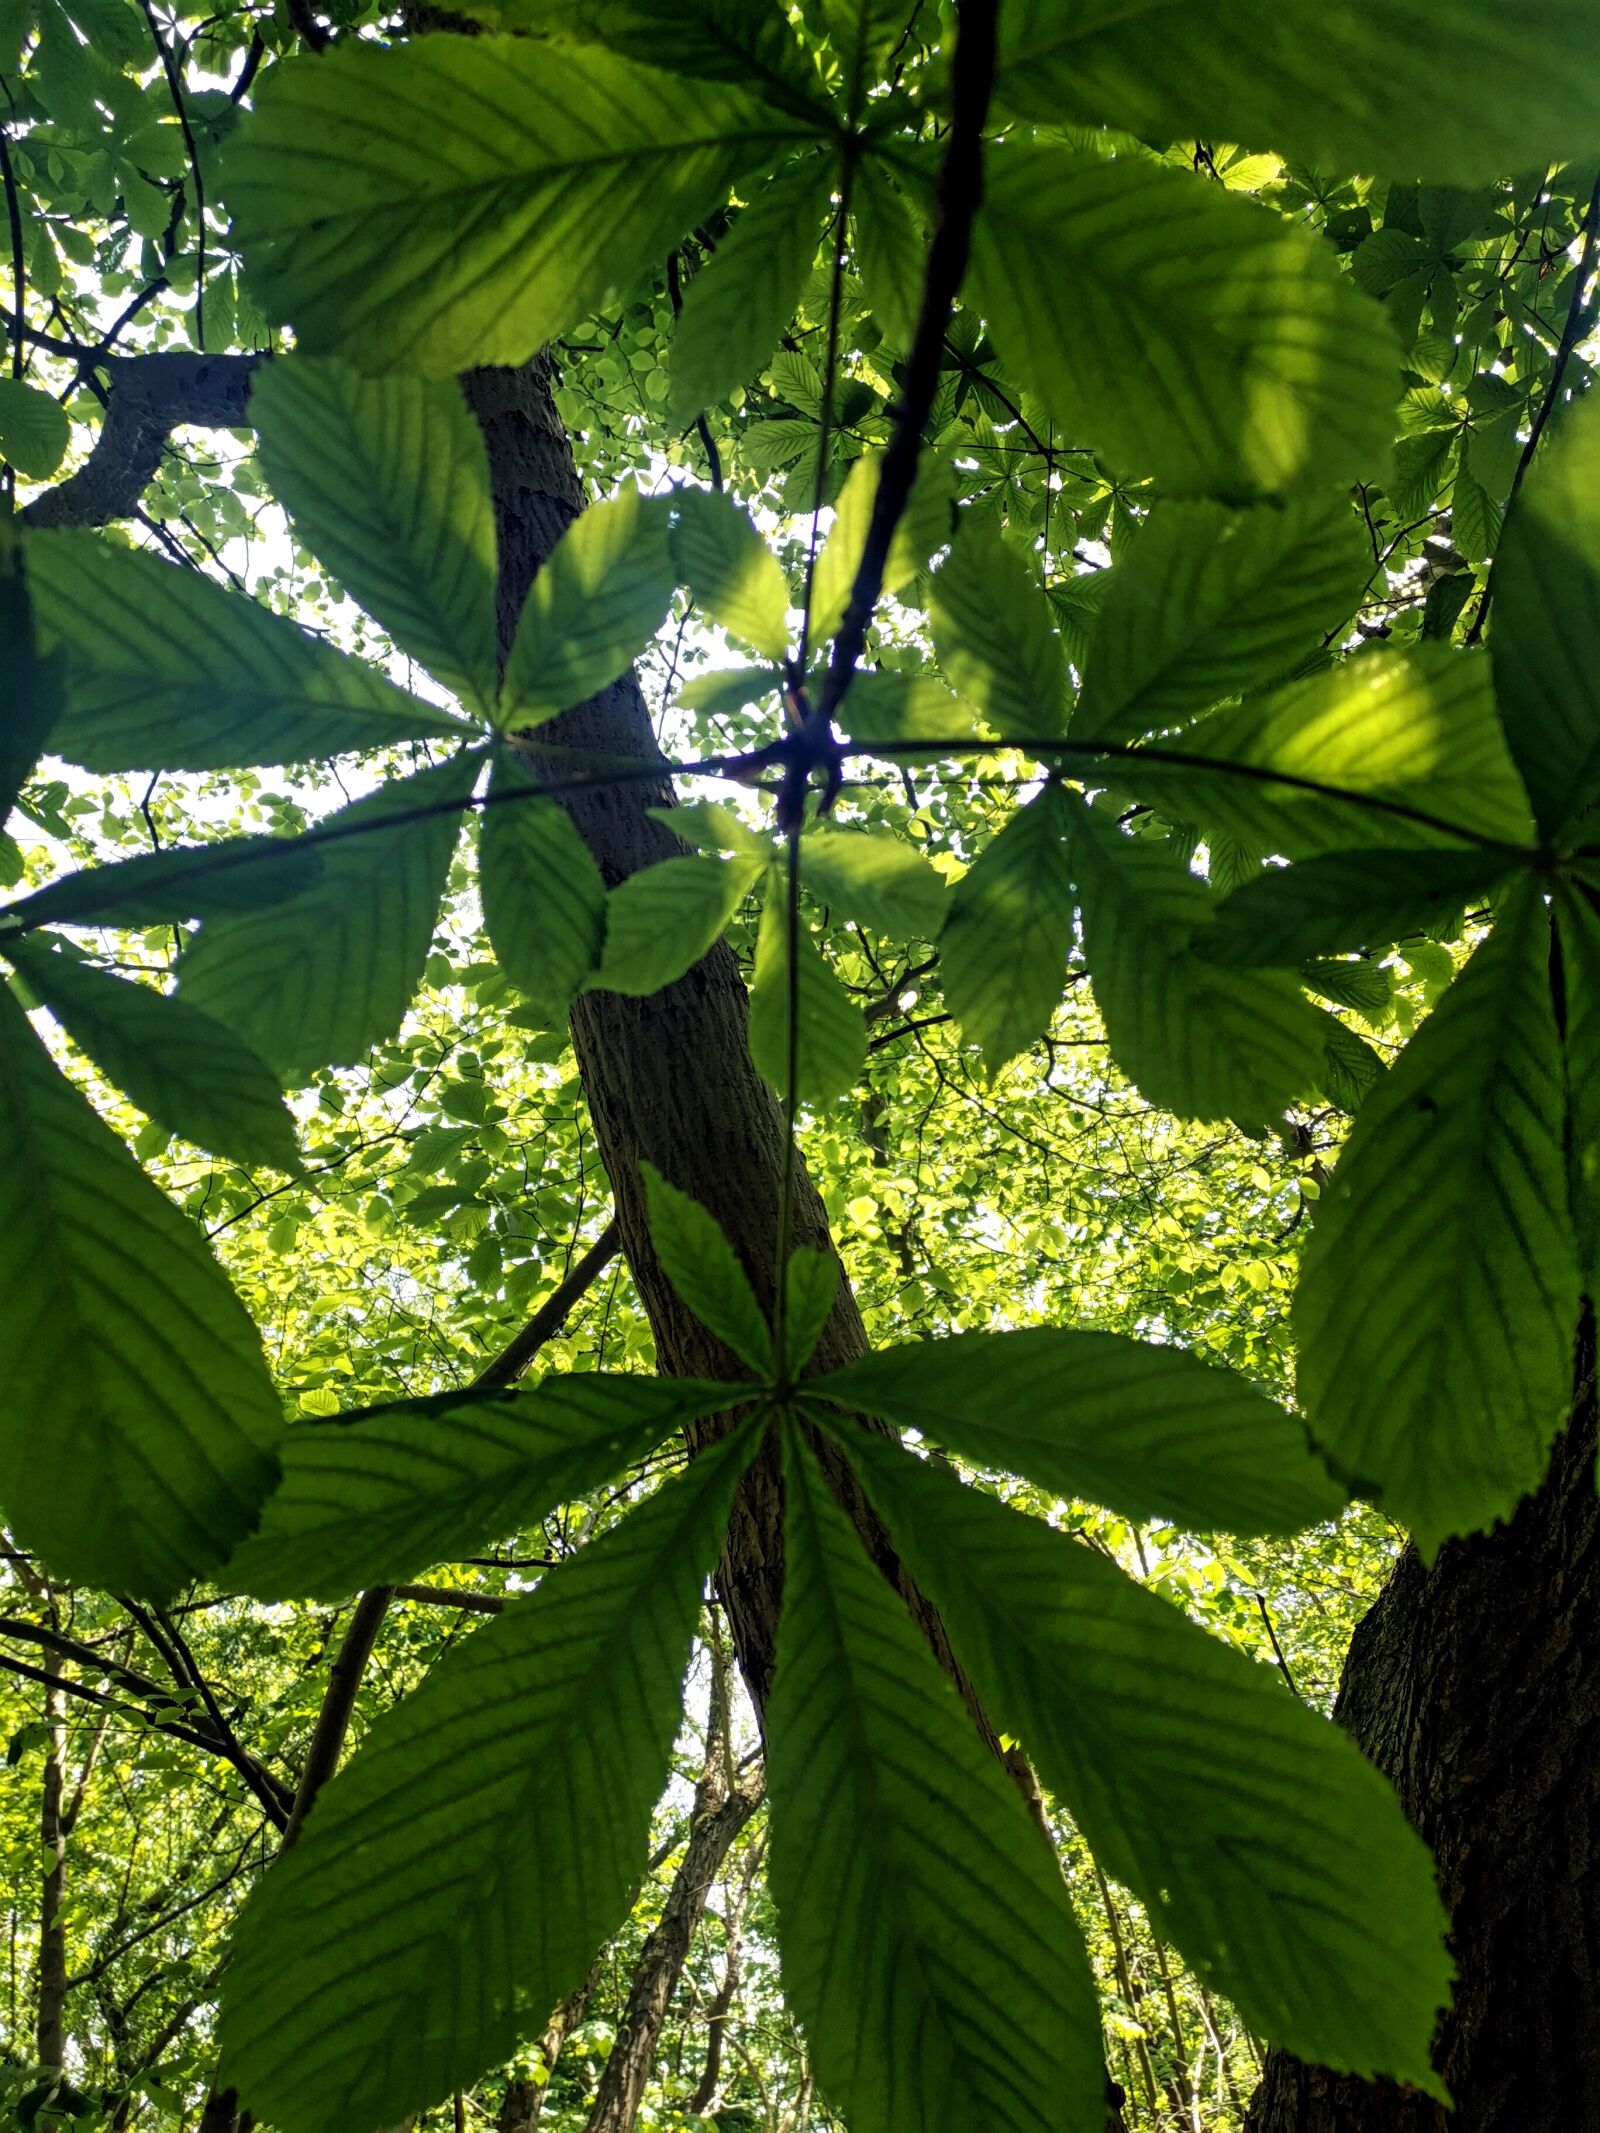 HUAWEI Mate 20 Pro sample photo. Plants, nature, green photography